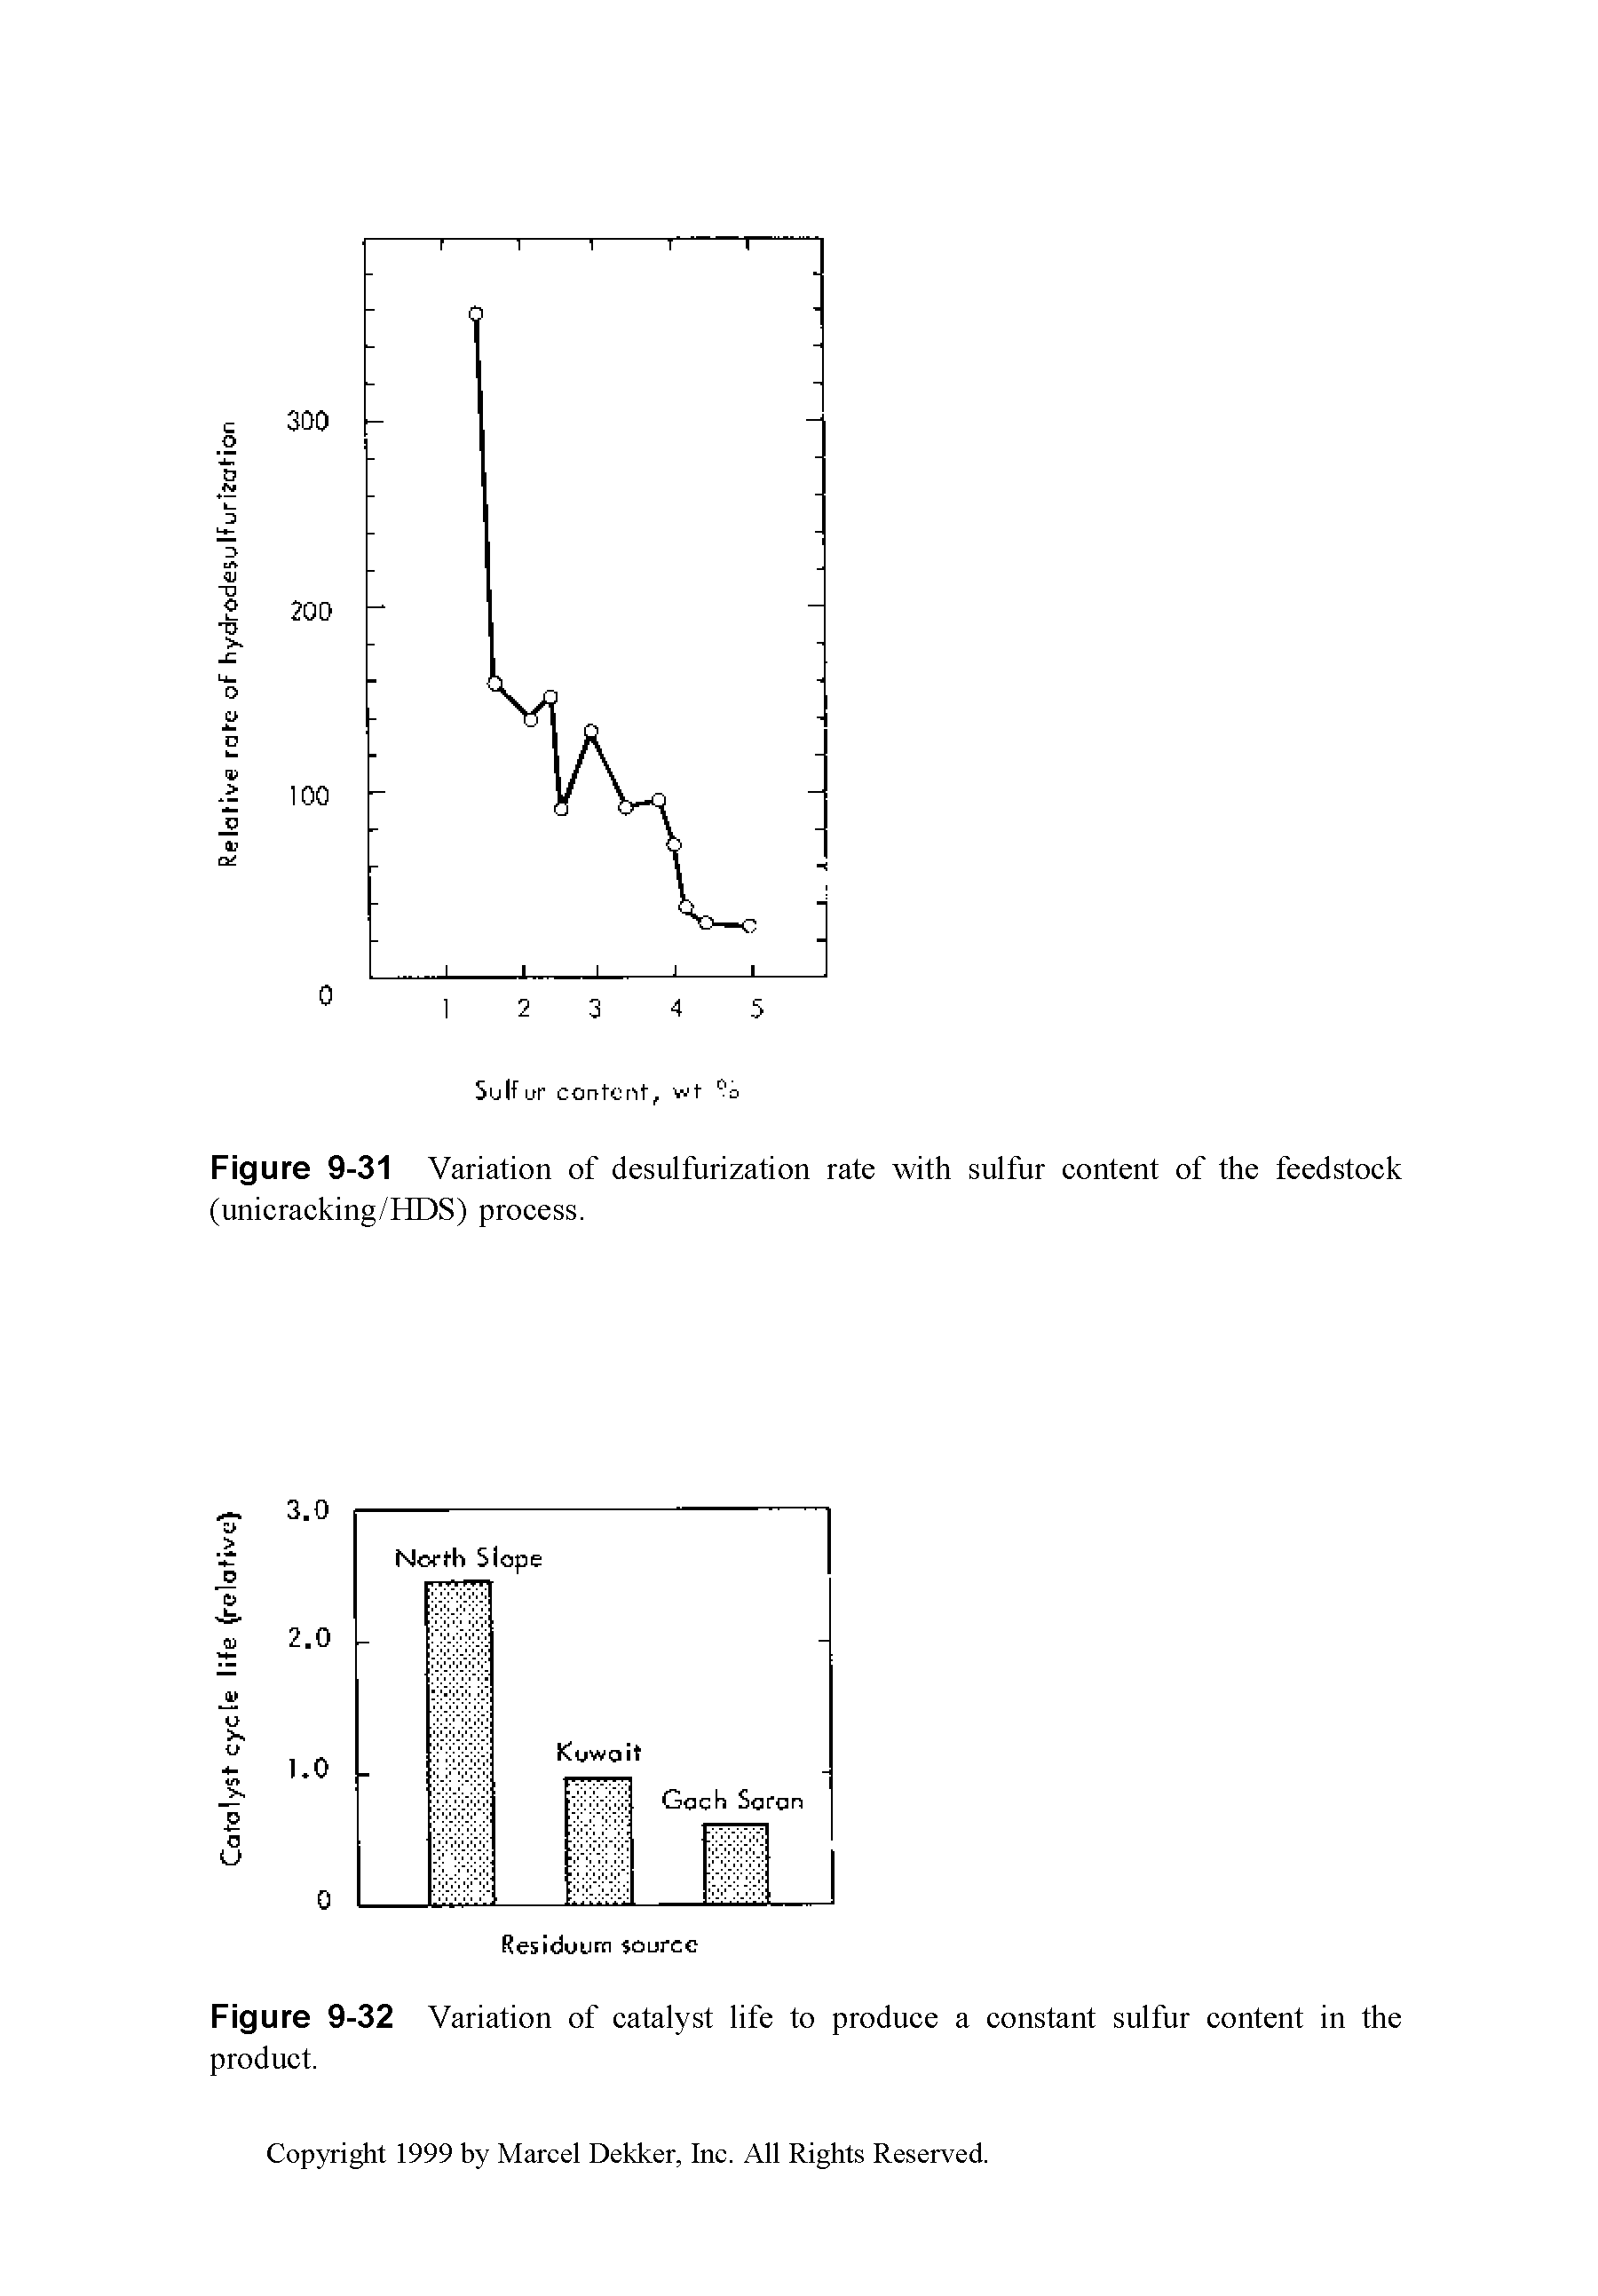 Figure 9-31 Variation of desulfurization rate with sulfur content of the feedstock (unicracking/HDS) process.